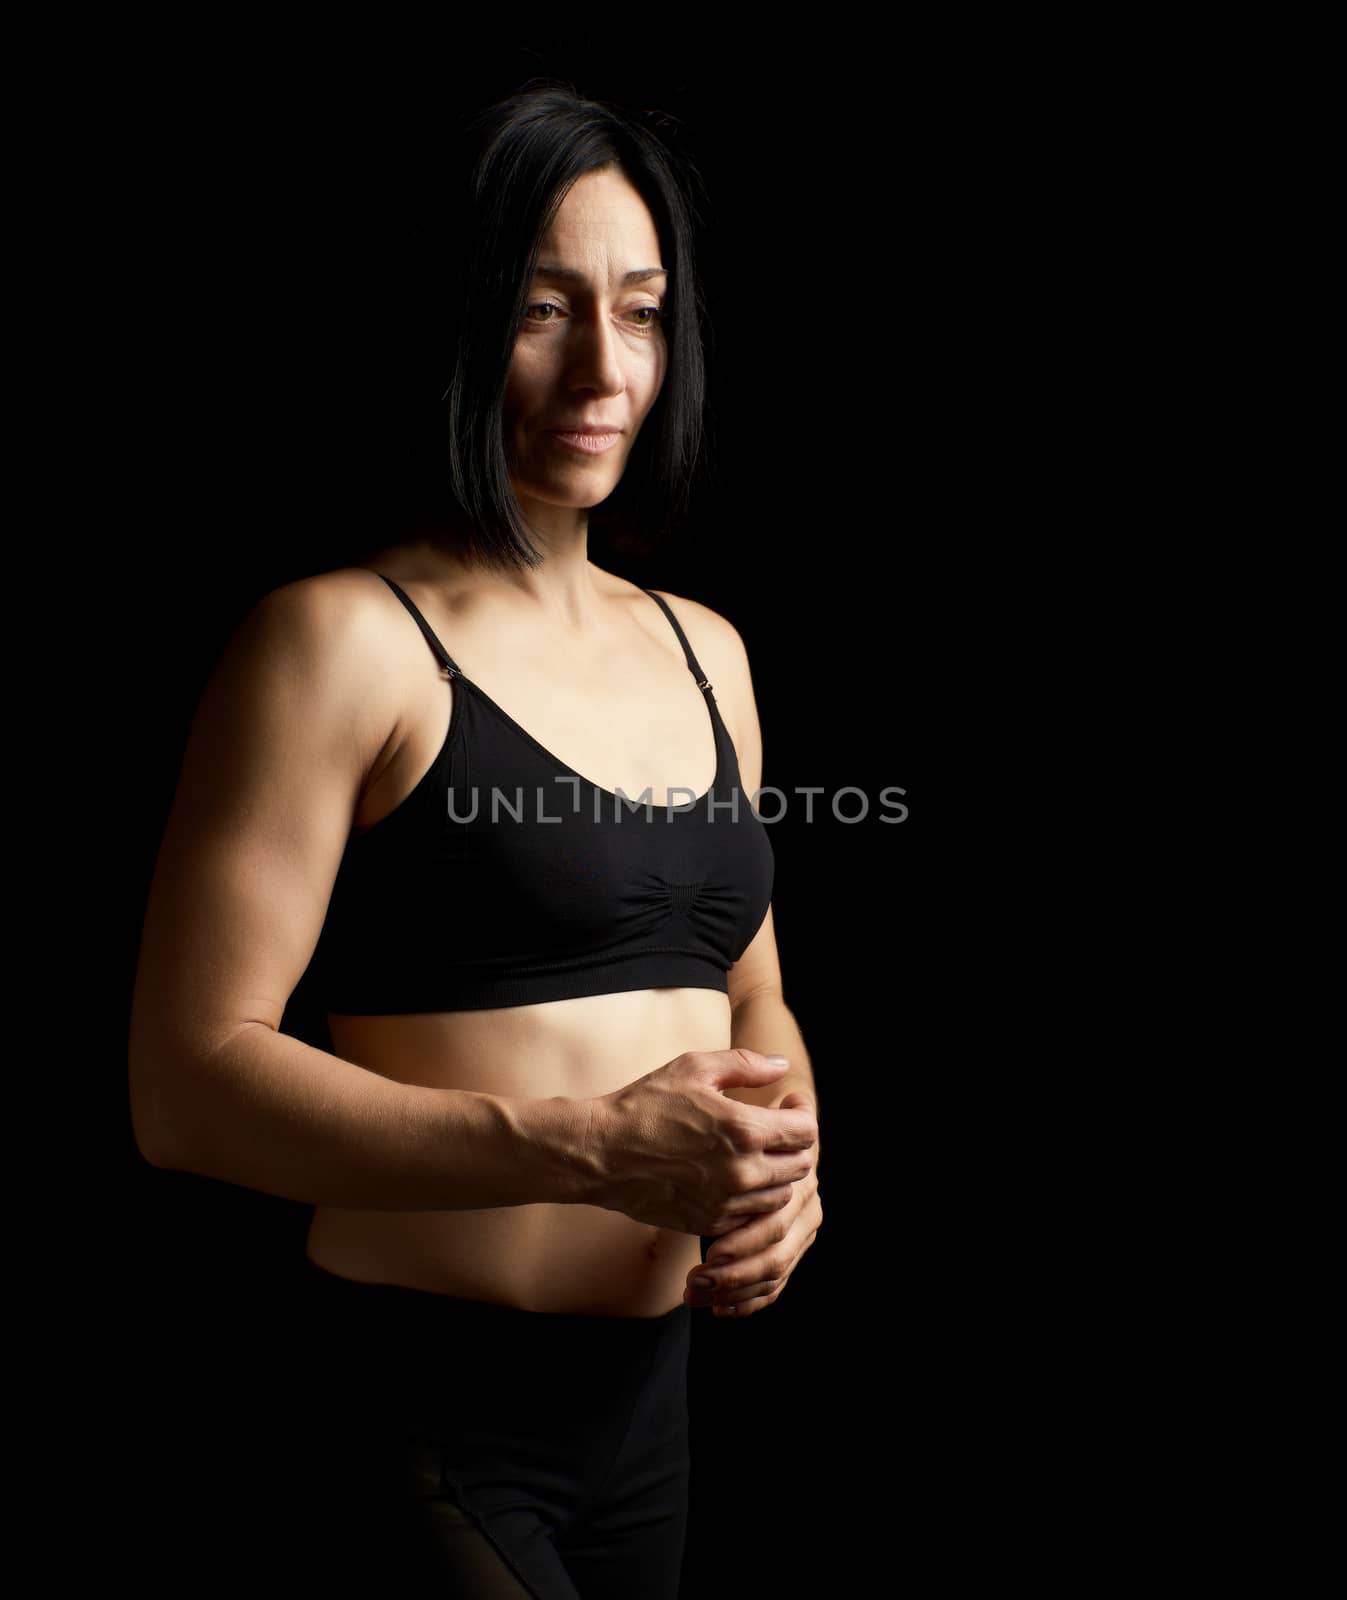 young girl with black hair athletic appearance stands on a dark background and looks away